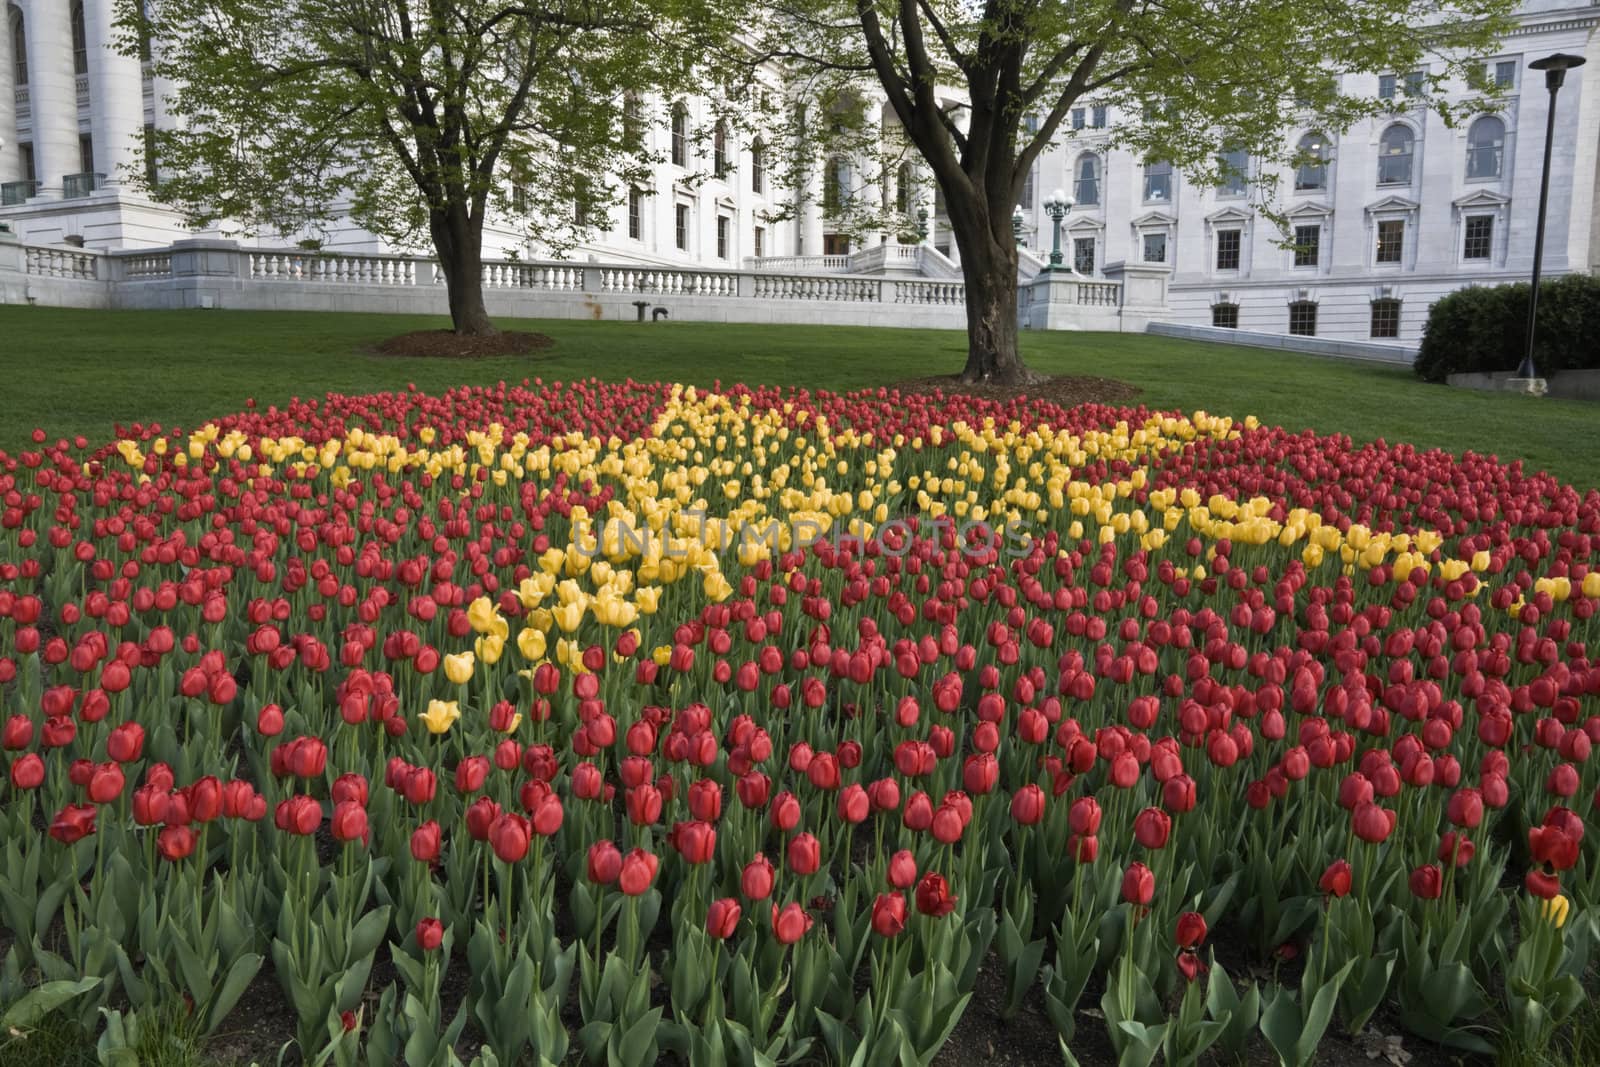 Tulips in front of State Capitol by benkrut